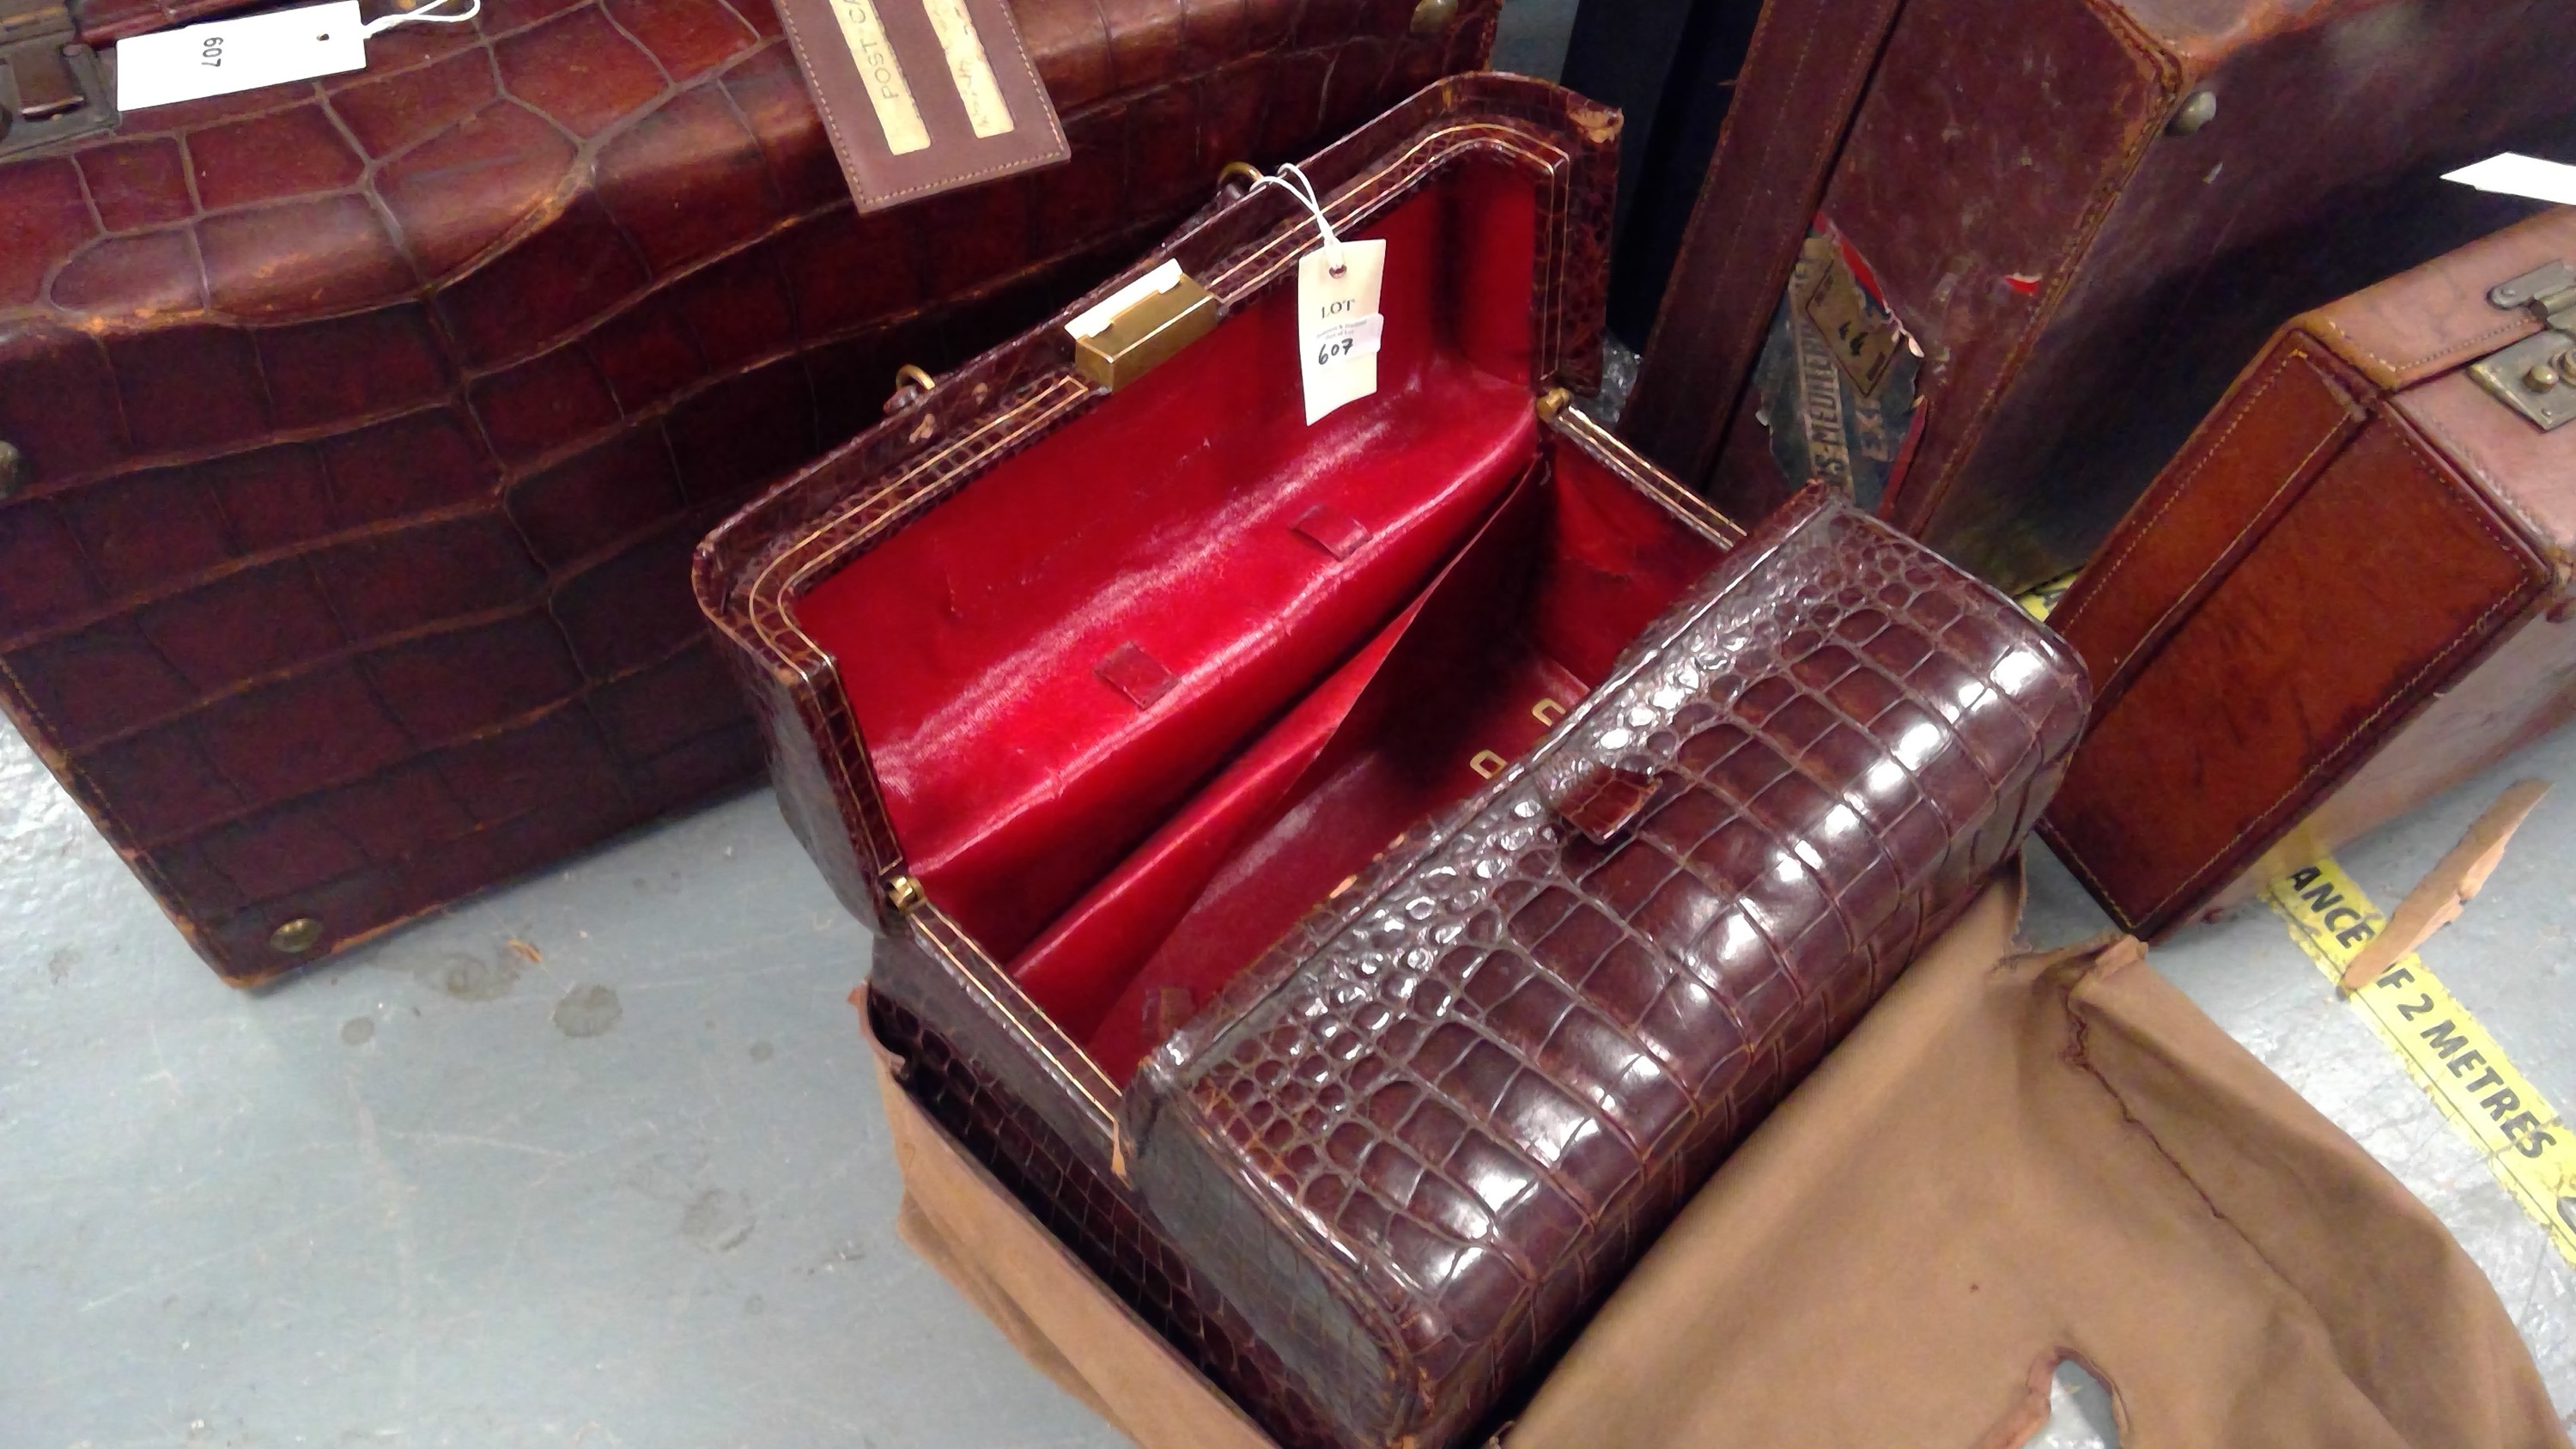 Early 20th Century Crocodile Skin Suitcase – Hobson May Collection